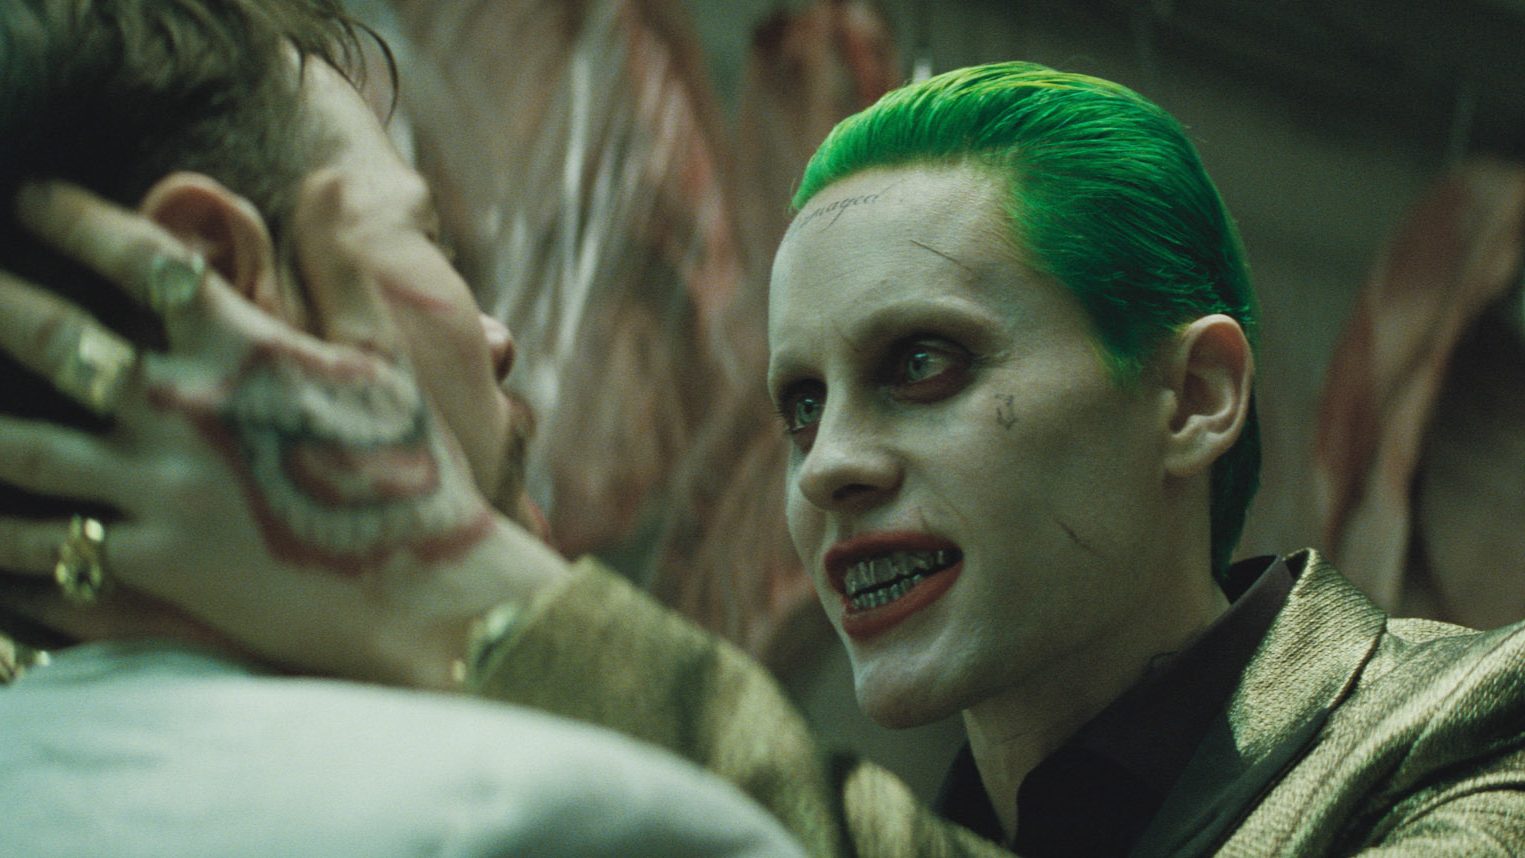 Movie reviews: What critics are saying about ‘Suicide Squad’